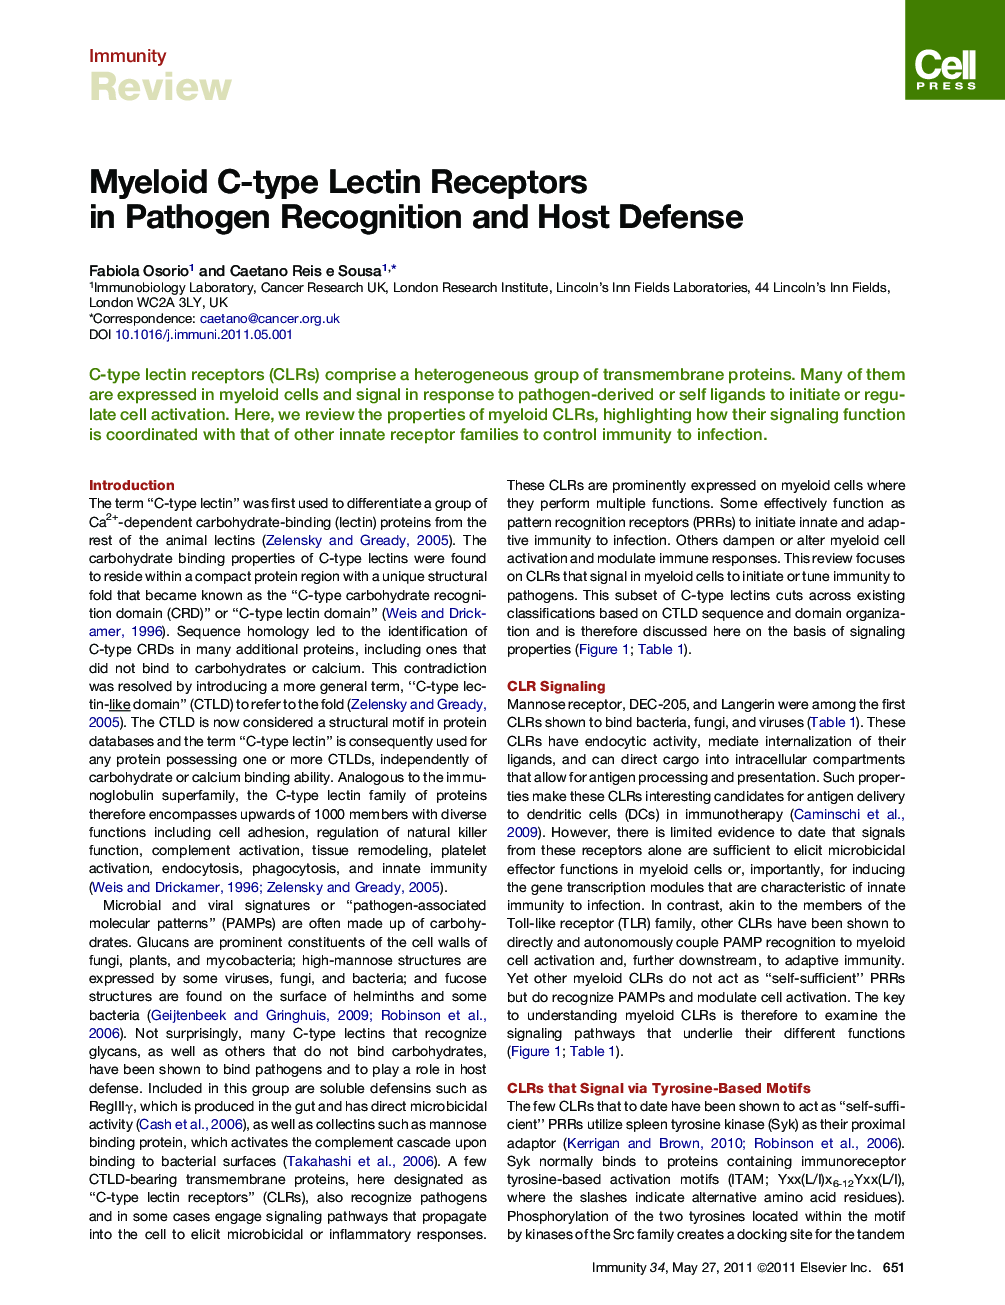 Myeloid C-type Lectin Receptors in Pathogen Recognition and Host Defense